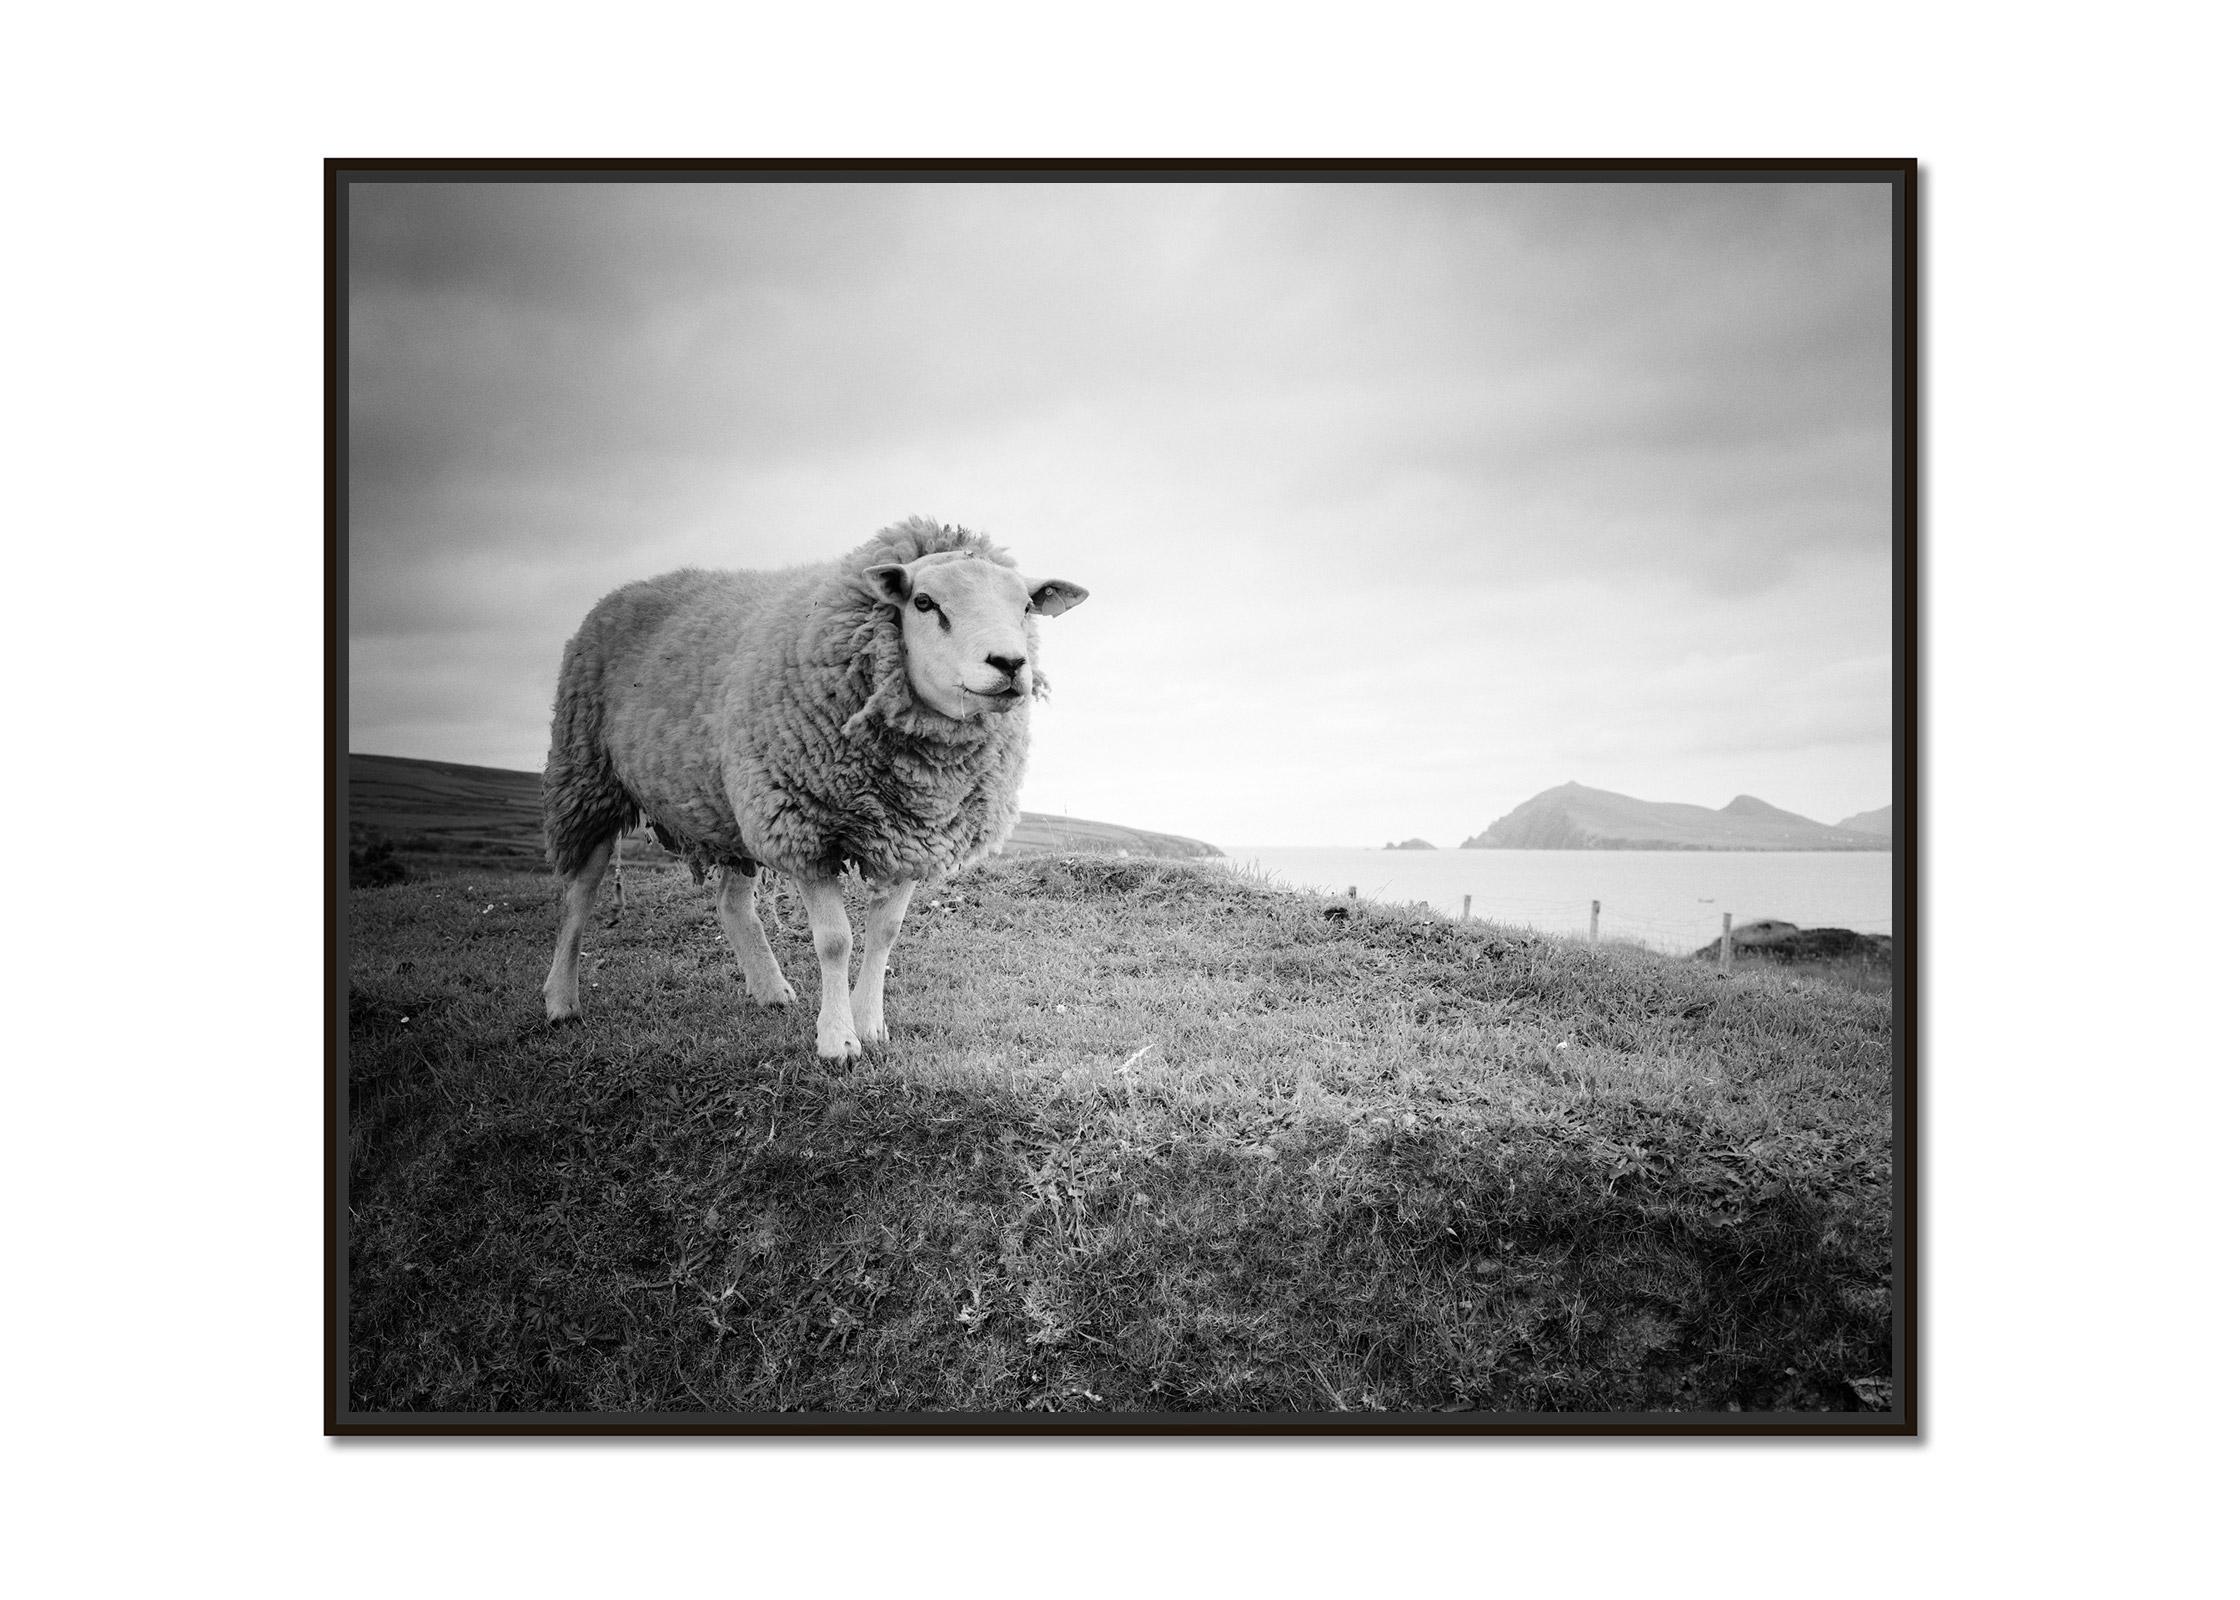 Bucky the Sheep Ireland black and white fine art landscape photography print - Photograph by Gerald Berghammer